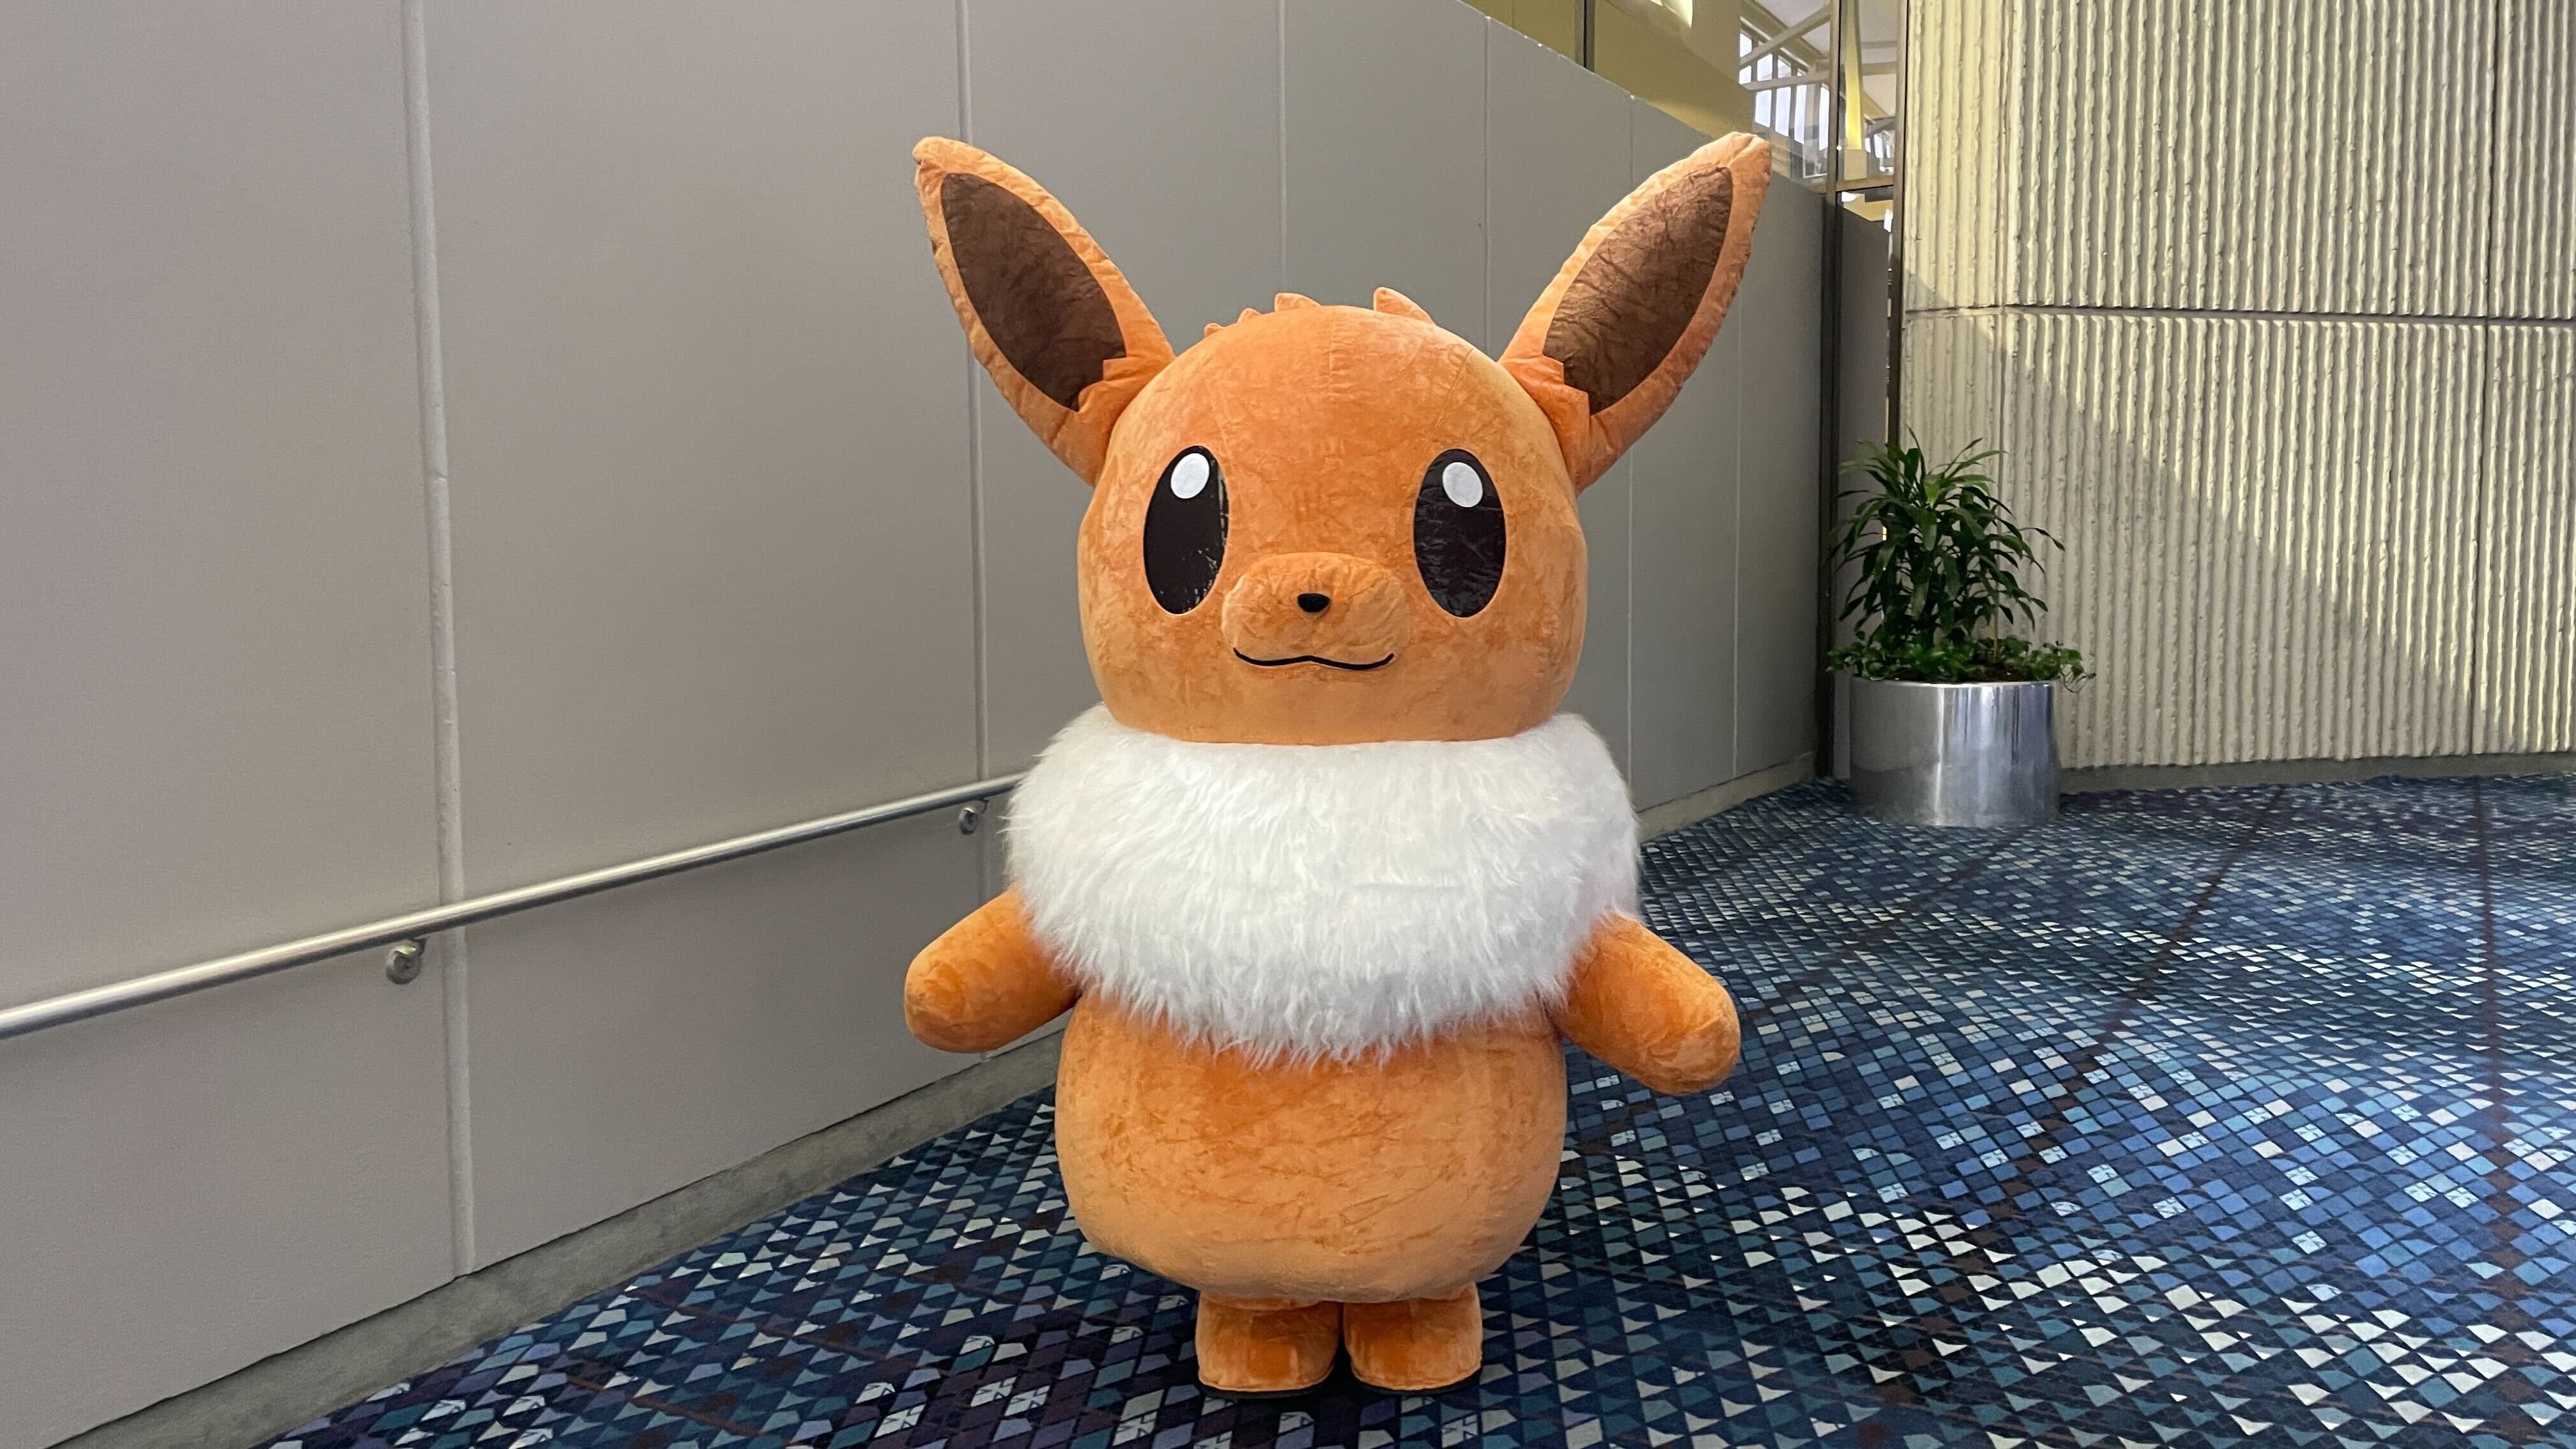 An giant-sized version of the normally cat-sized of the fictional eevee fox animal from the Pokemon franchise.